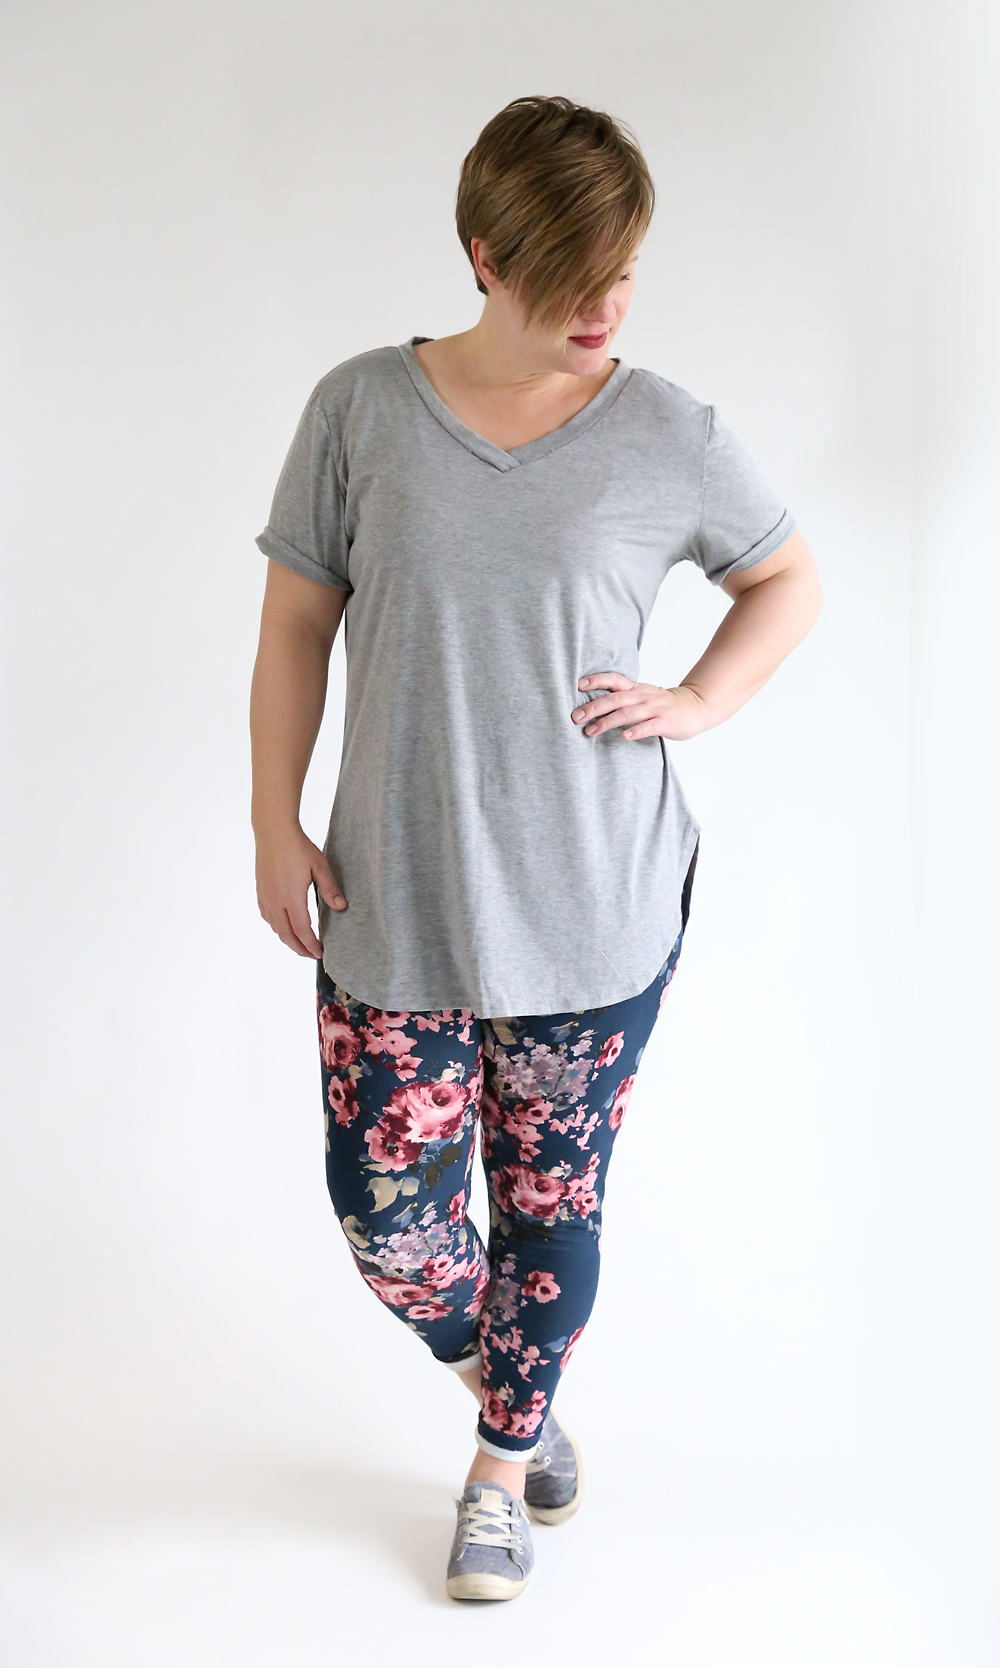 A woman wearing a long grey t-shirt and floral leggings